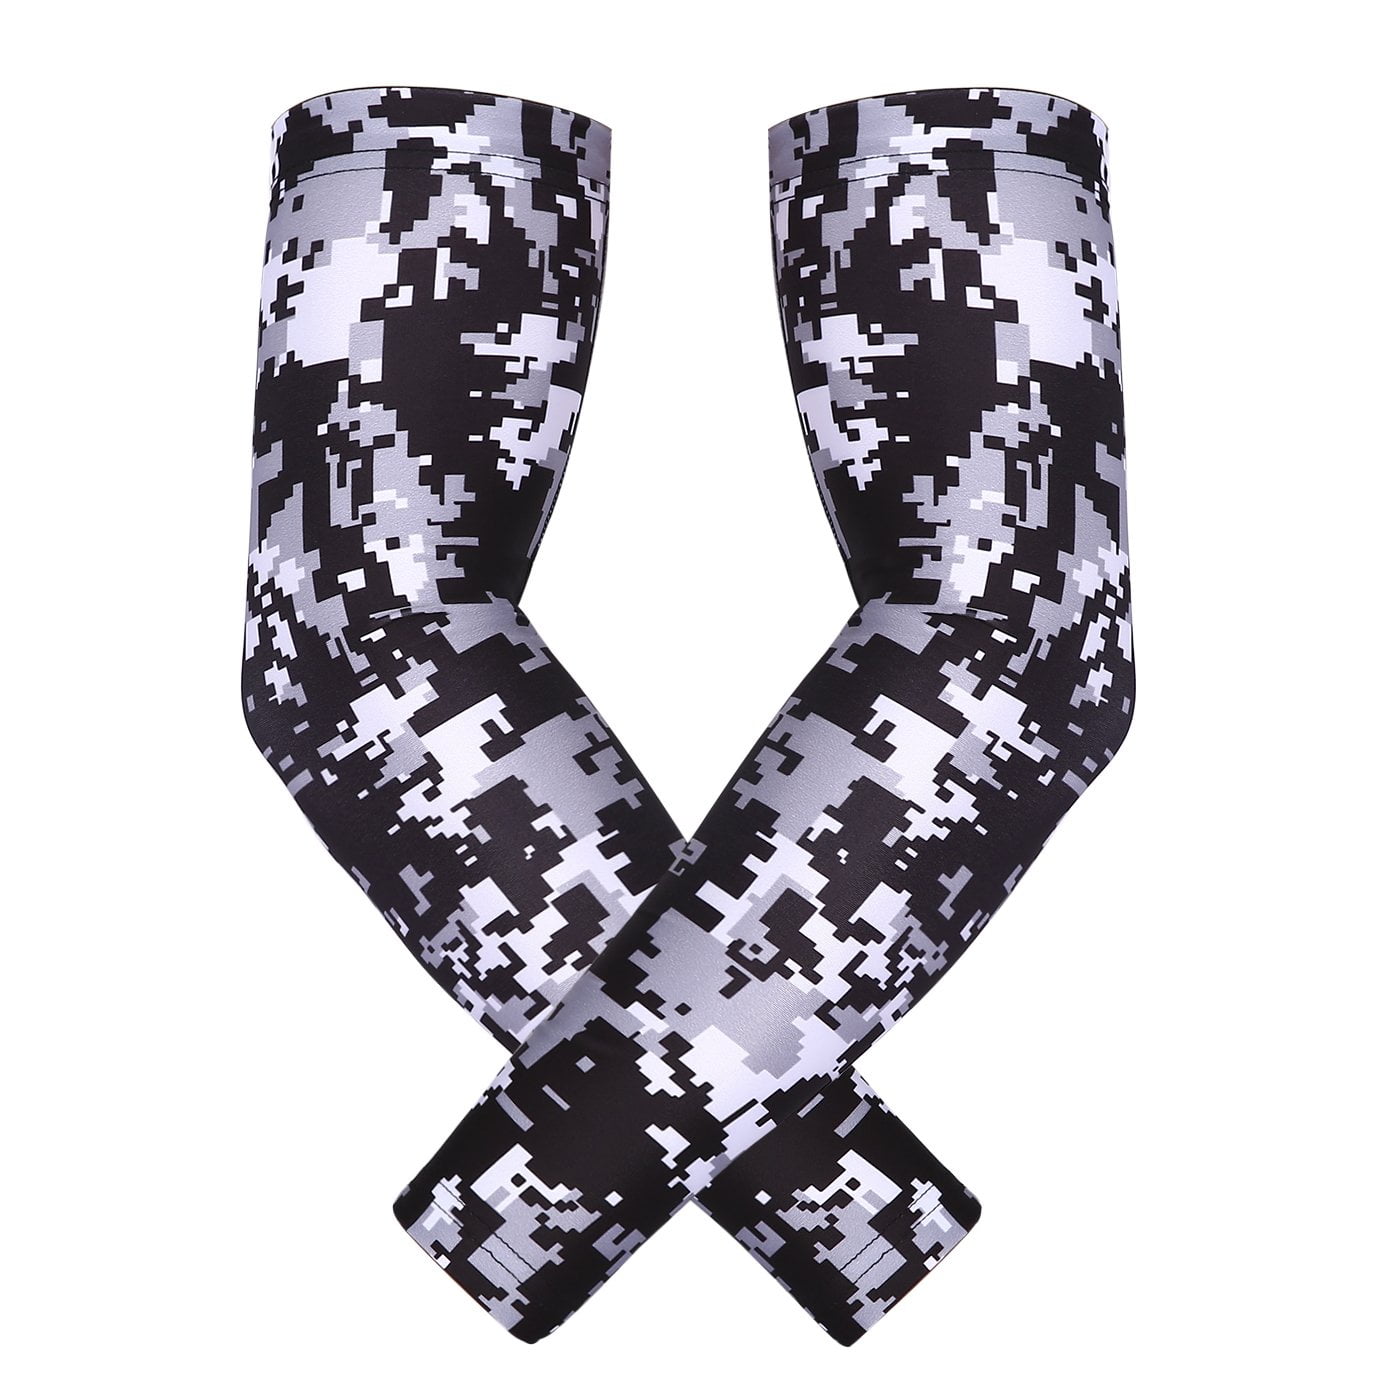 Pair of Black Gray Grey Digital Camo Shooter Moisture Wicking Sports Arm Sleeves NEW